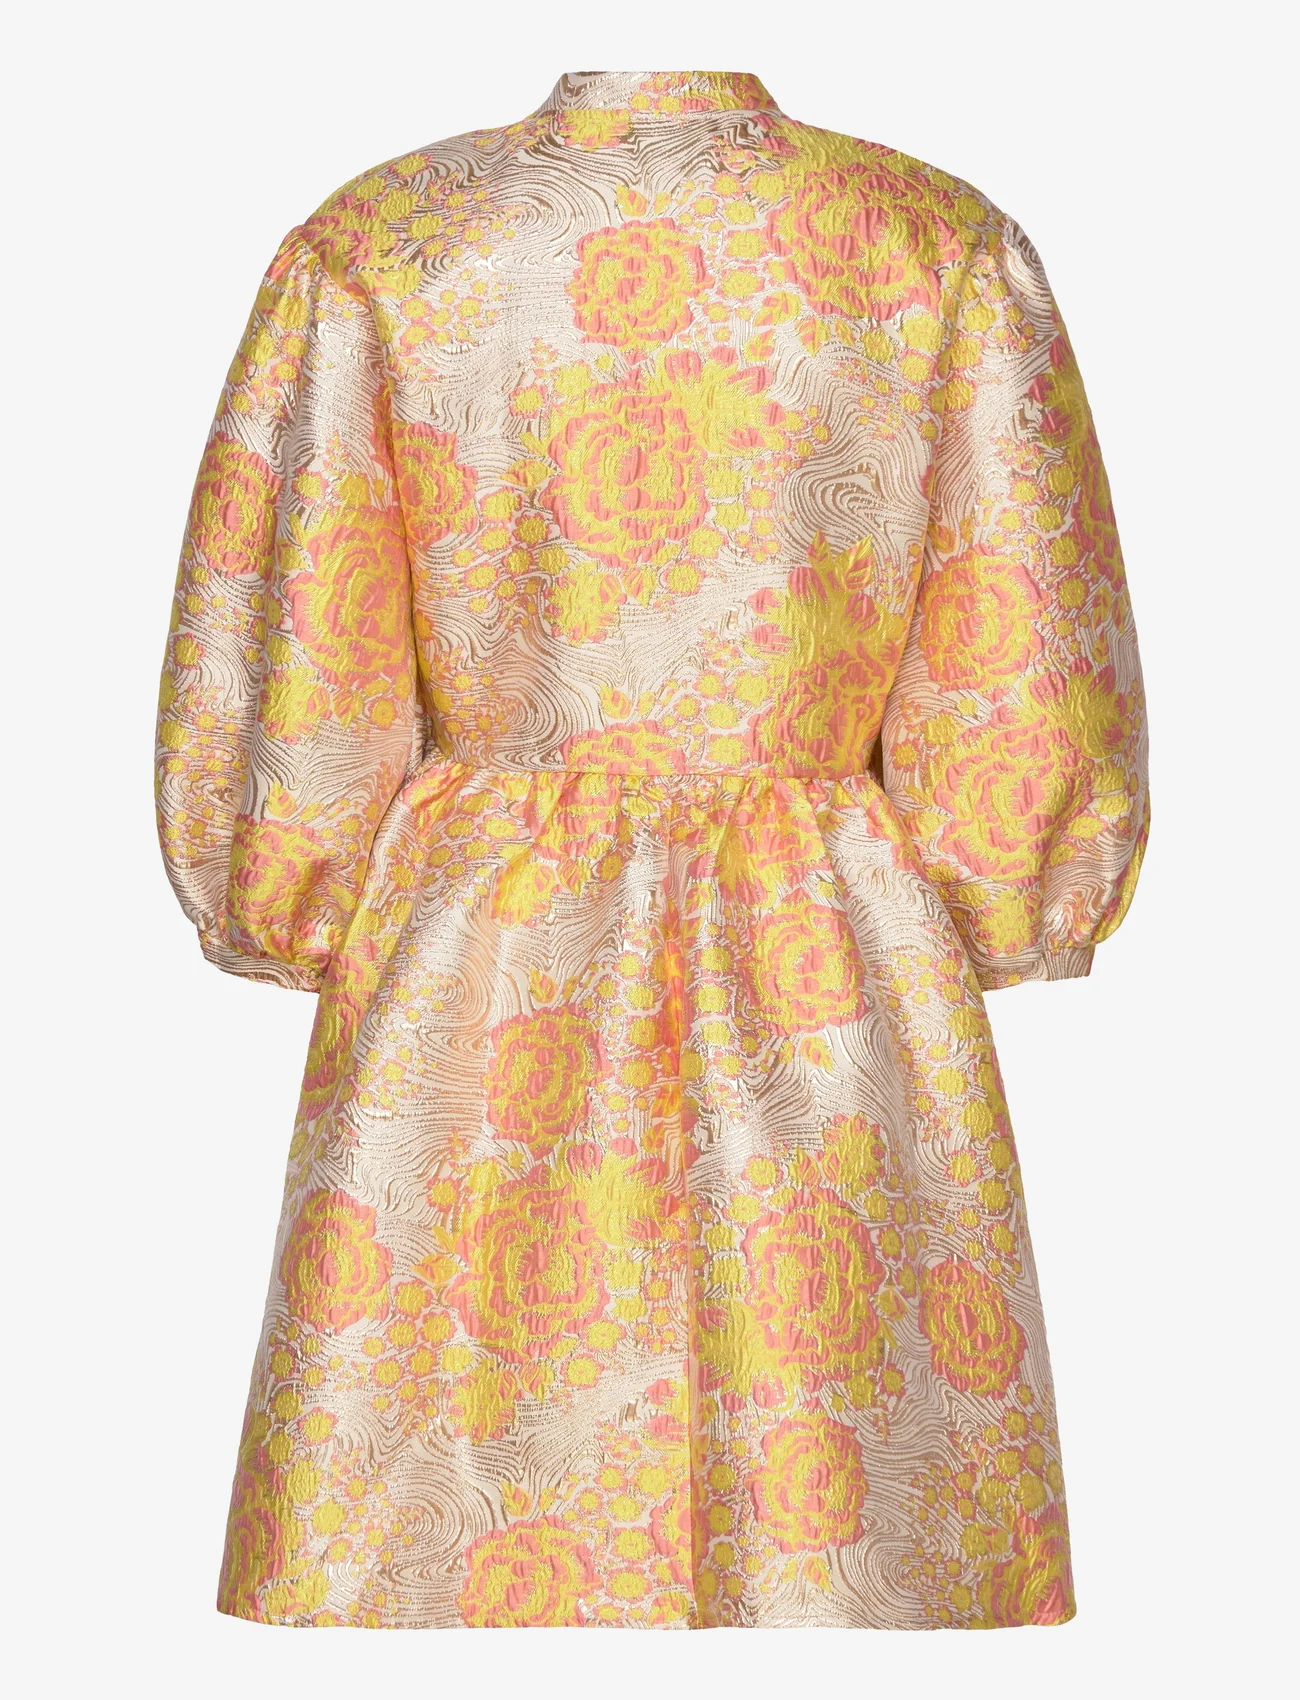 Noella - Aya Wrap Dress - party wear at outlet prices - yellow/rose mix - 1